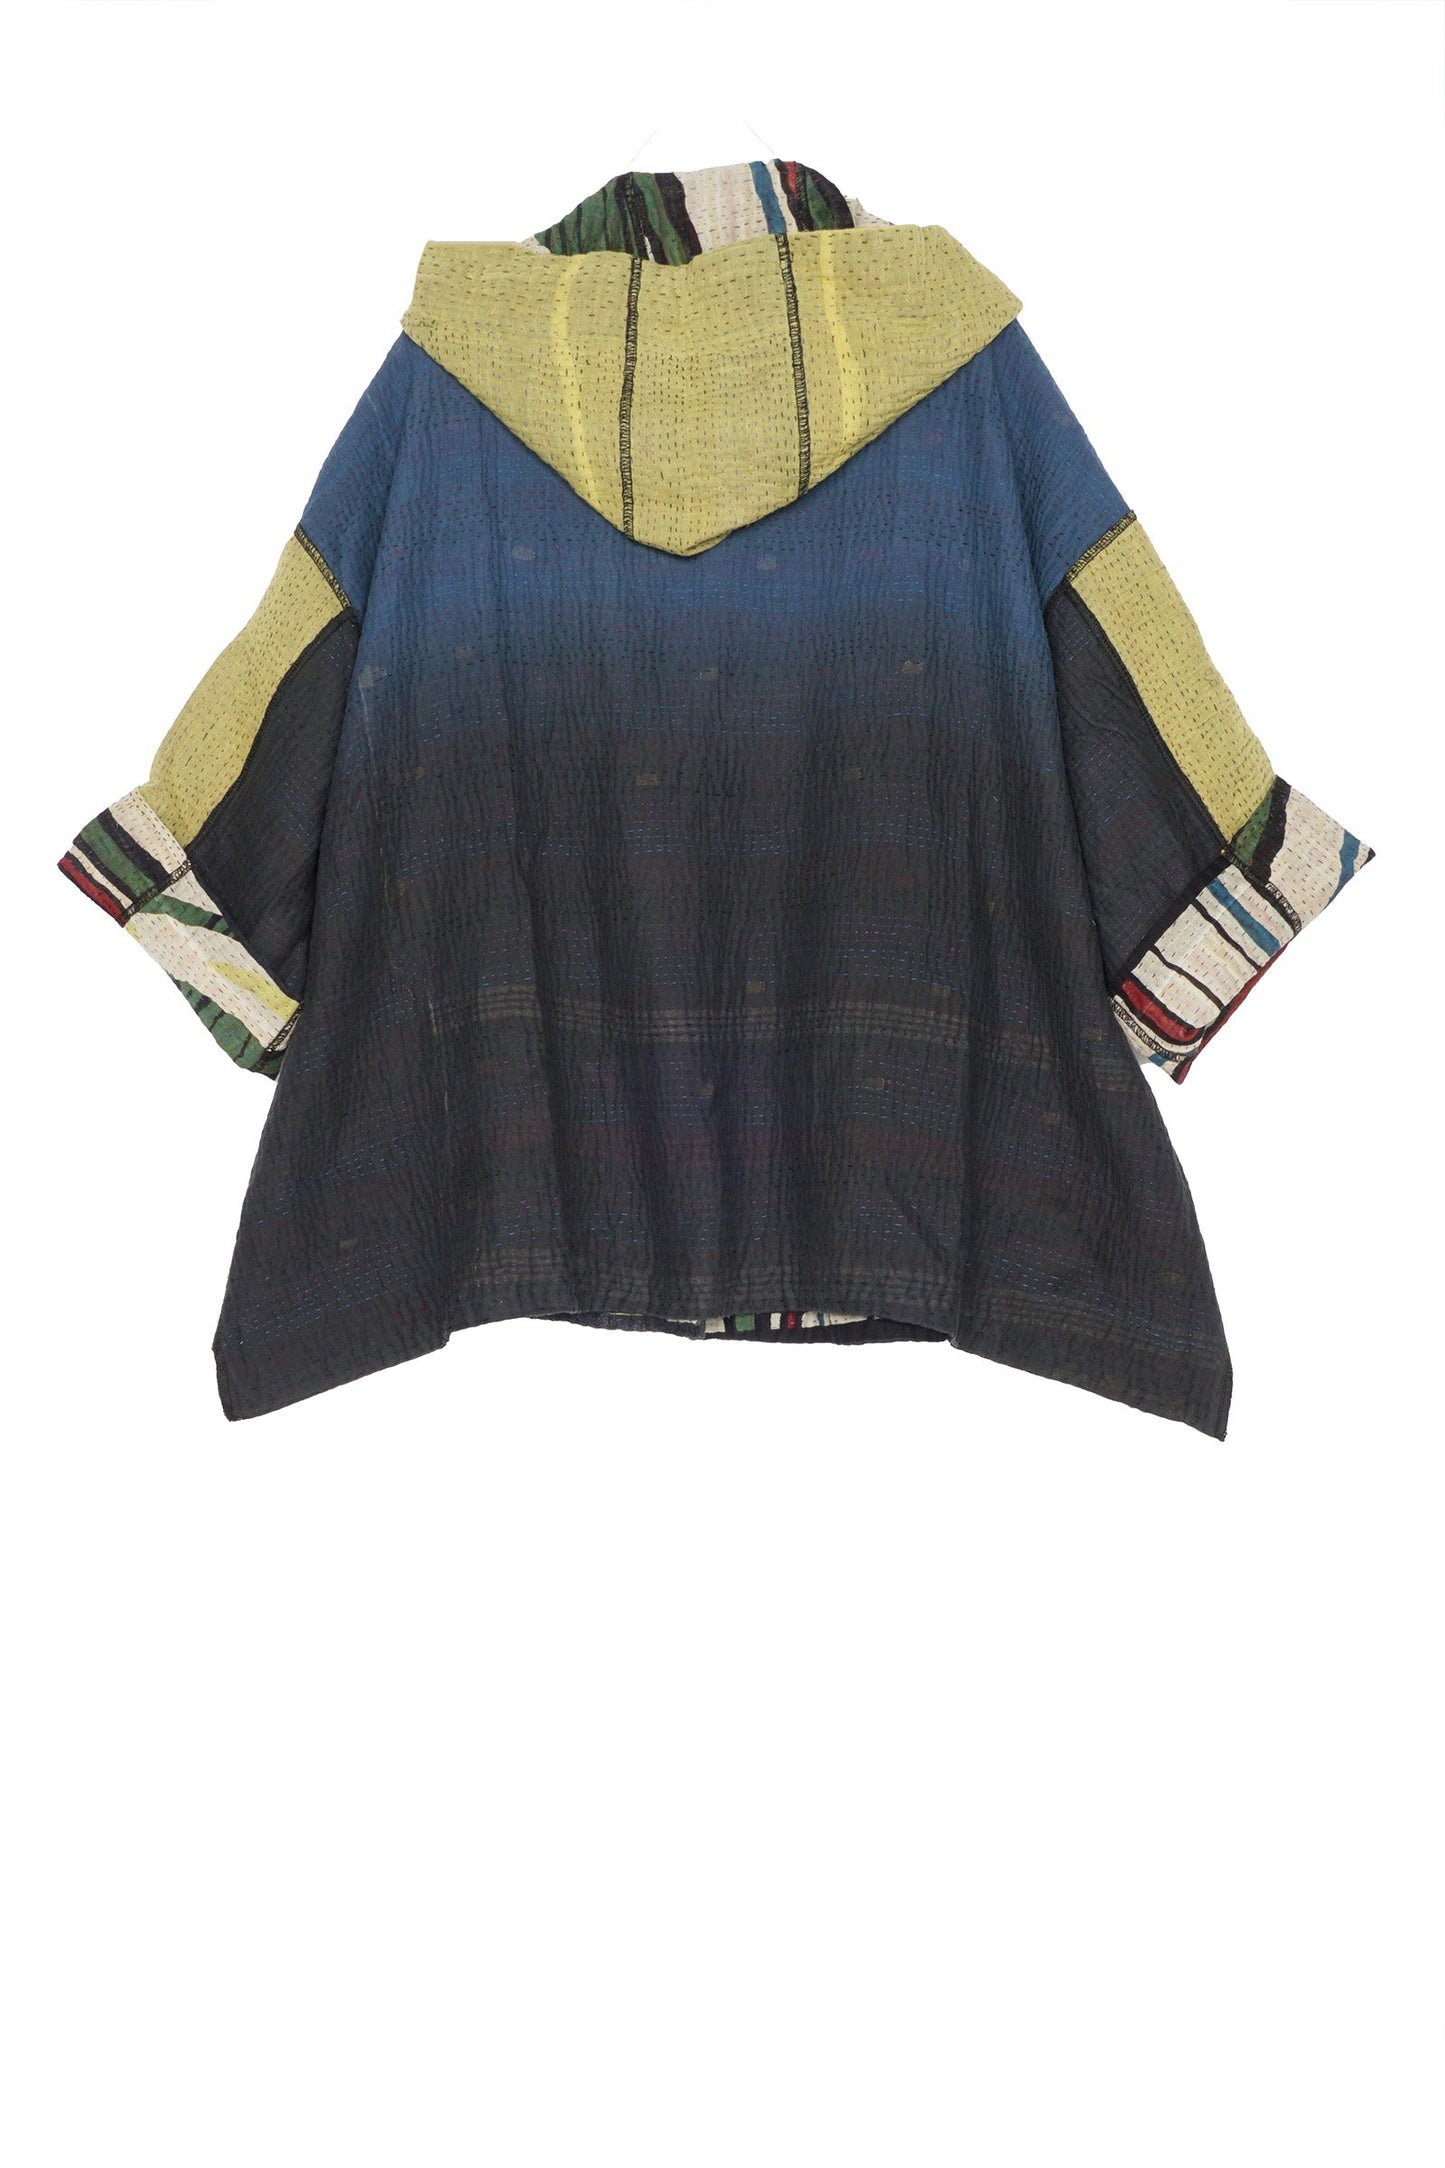 STRIPE AND BENDS KANTHA HOODIE PONCHO